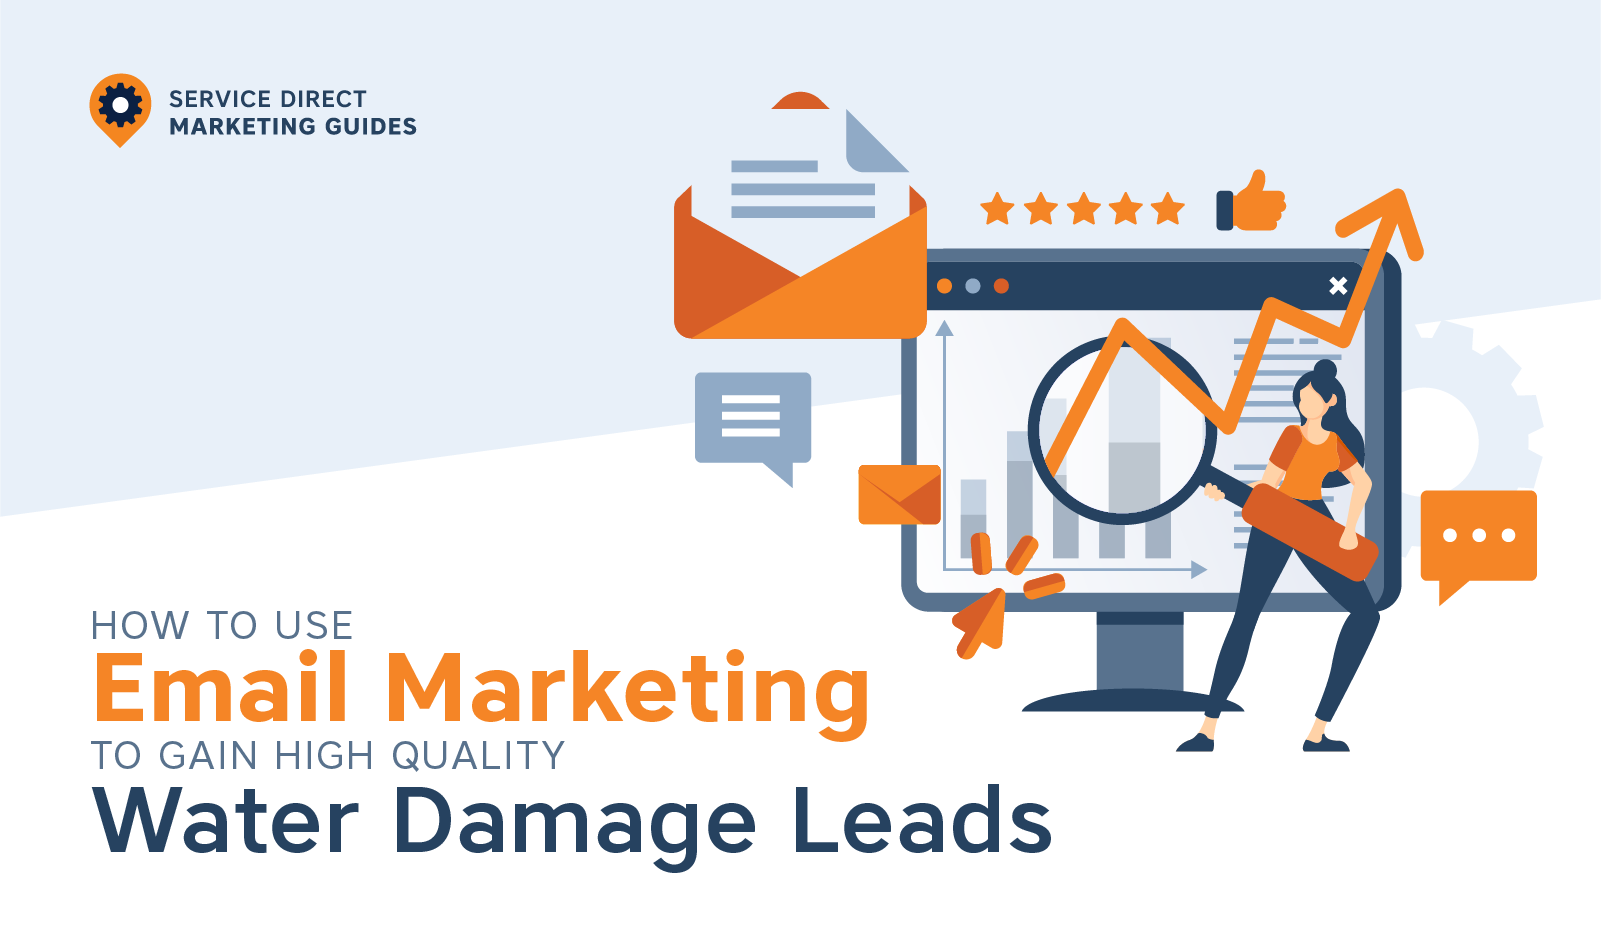 The Top Water Damage Email Marketing Strategies to Generate Leads